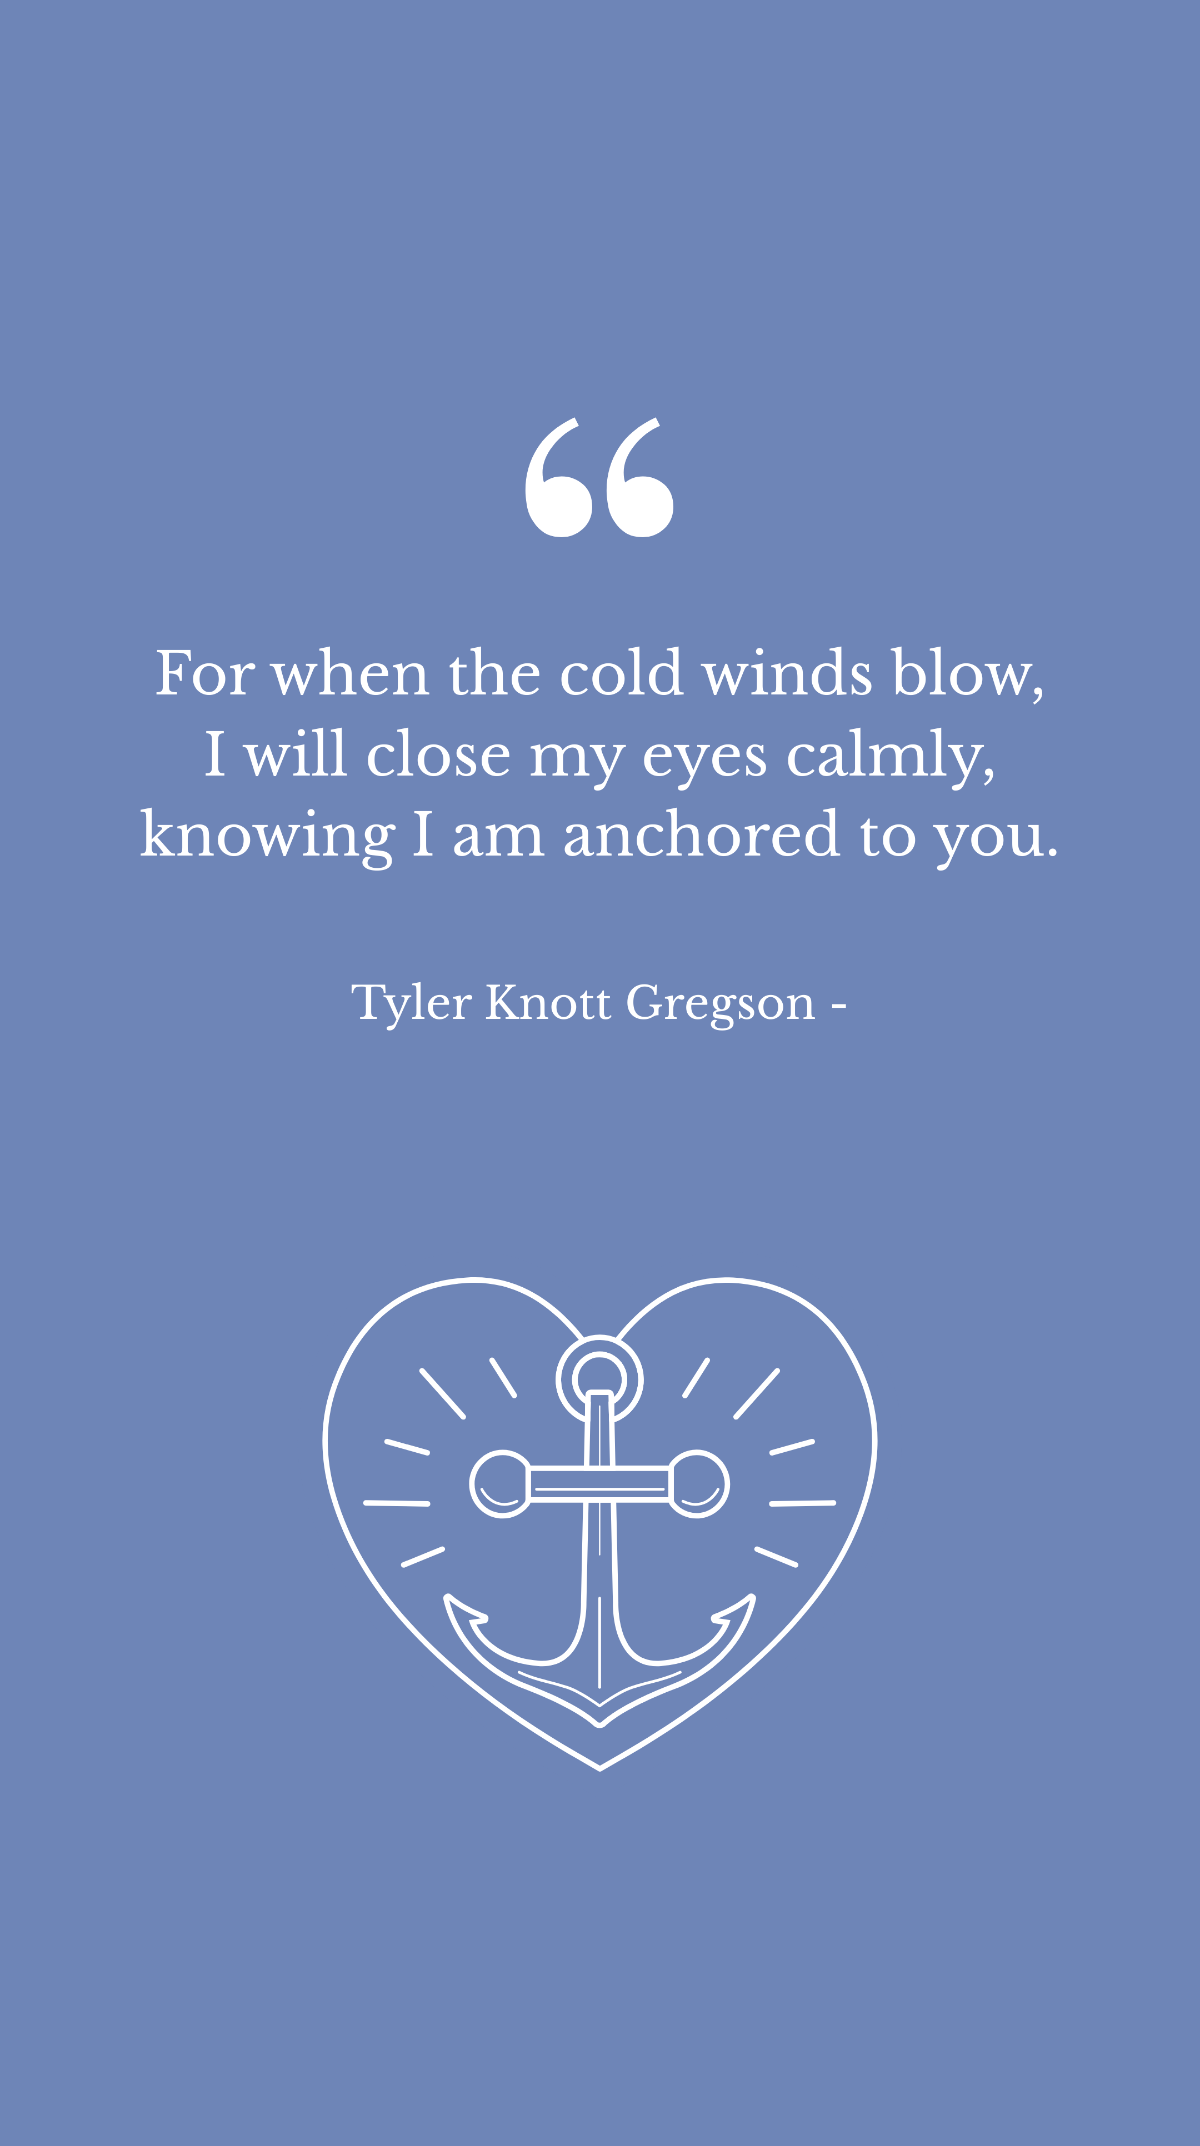 Tyler Knott Gregson - For when the cold winds blow, I will close my eyes calmly, knowing I am anchored to you. Template